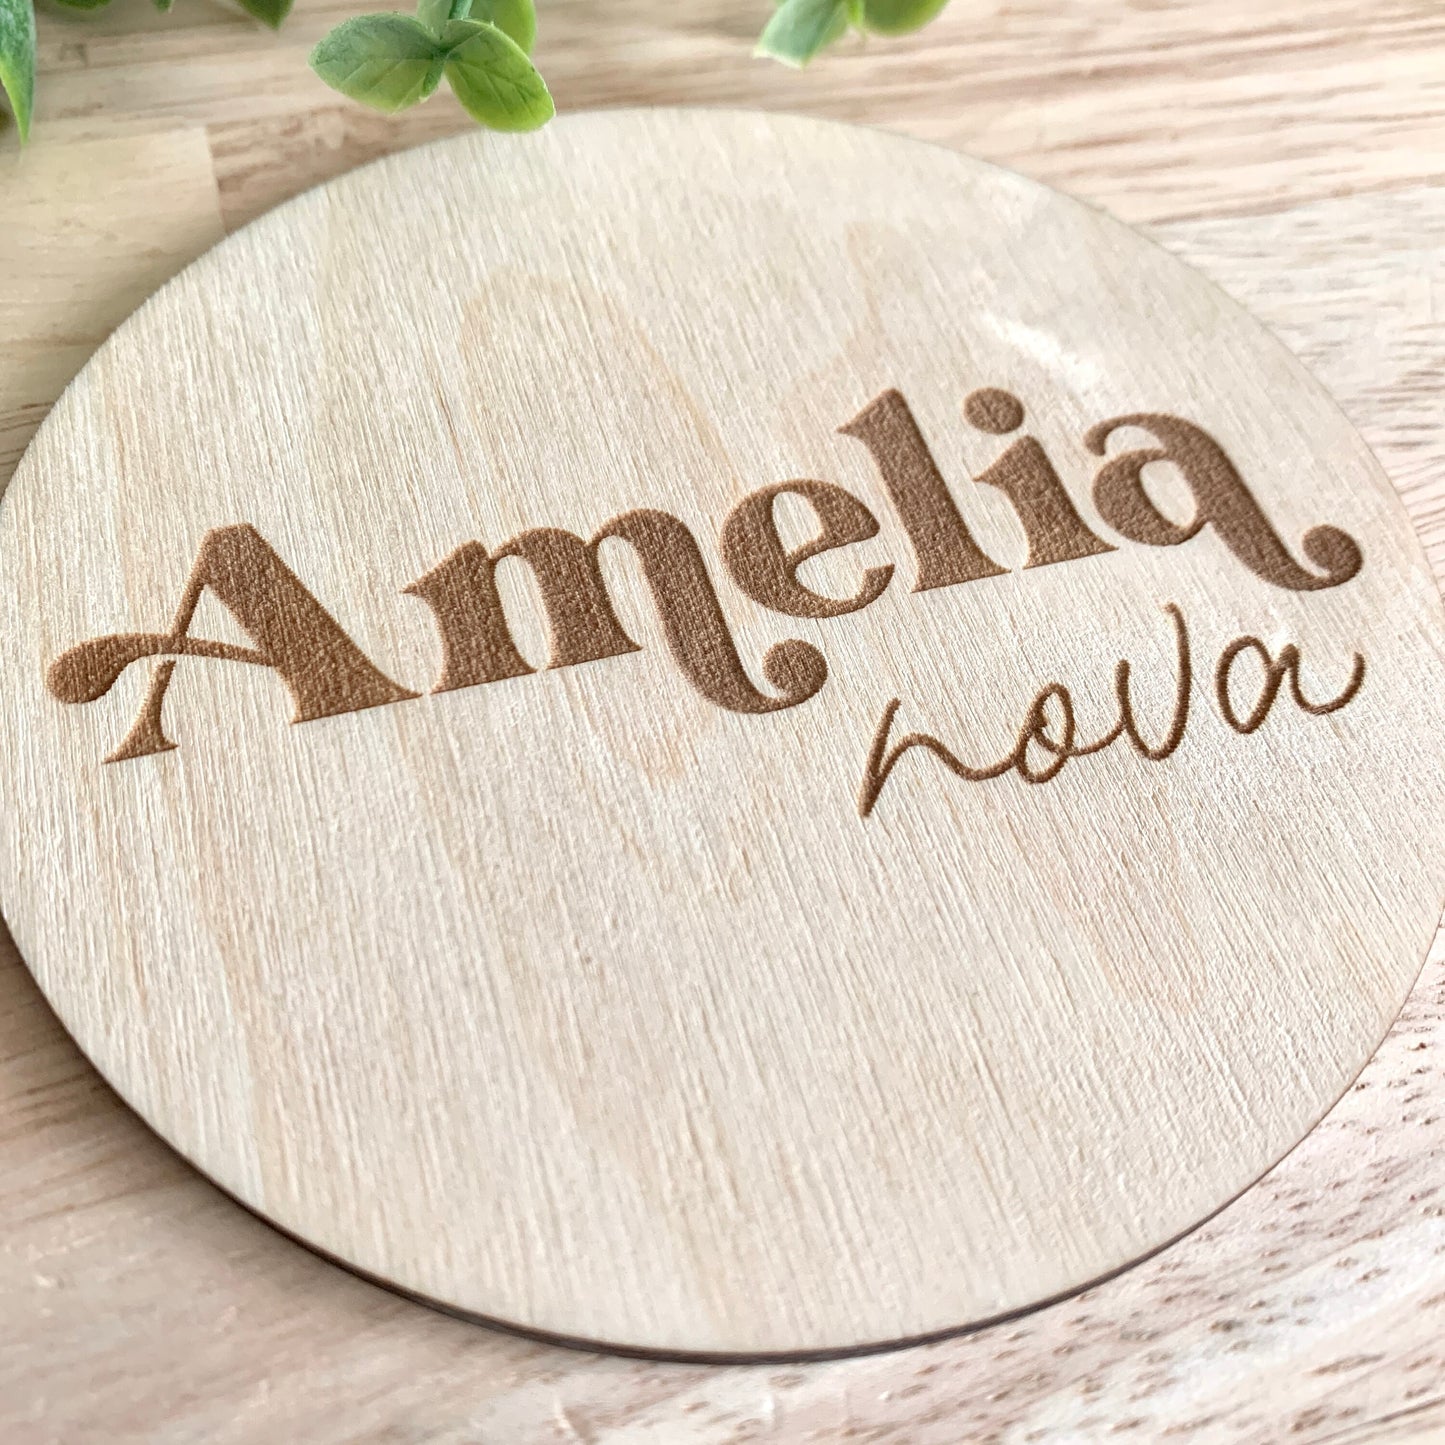 Baby Name Sign / Baby Photo Prop / Pregnancy Announcement / Wooden Sign